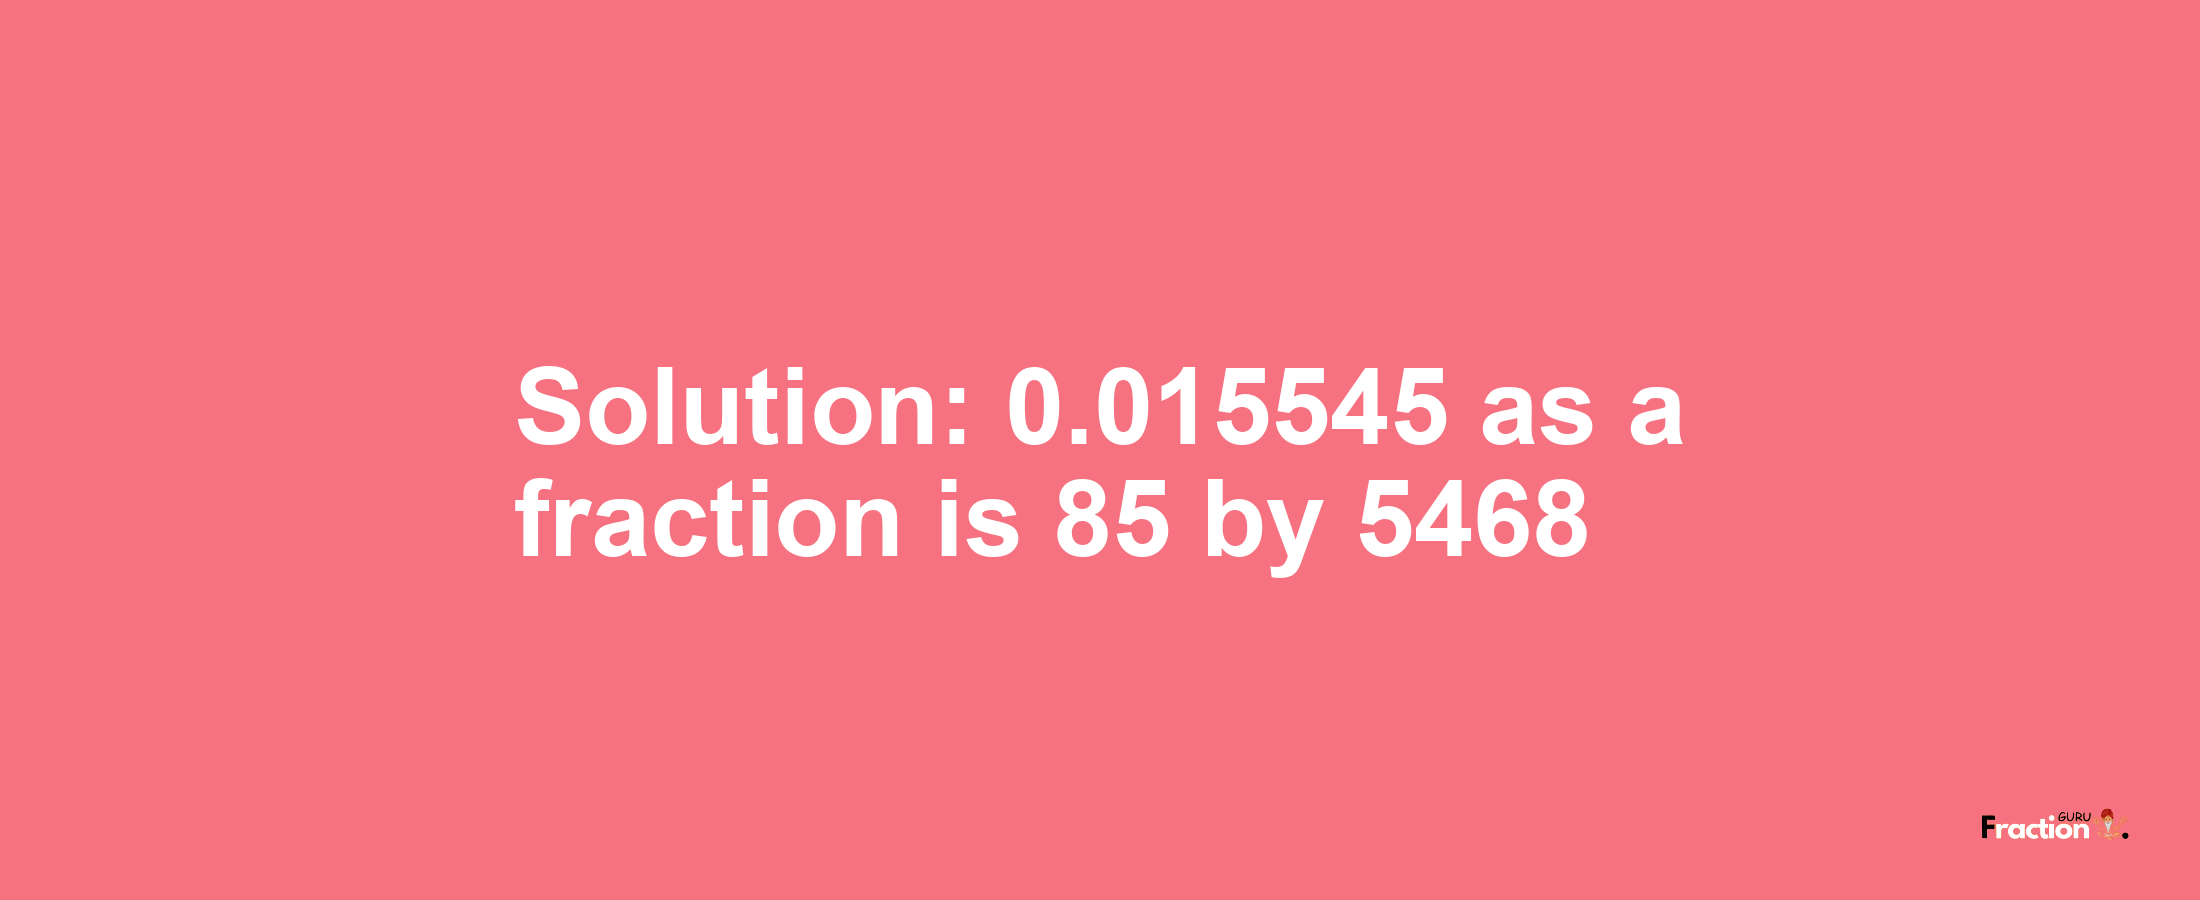 Solution:0.015545 as a fraction is 85/5468